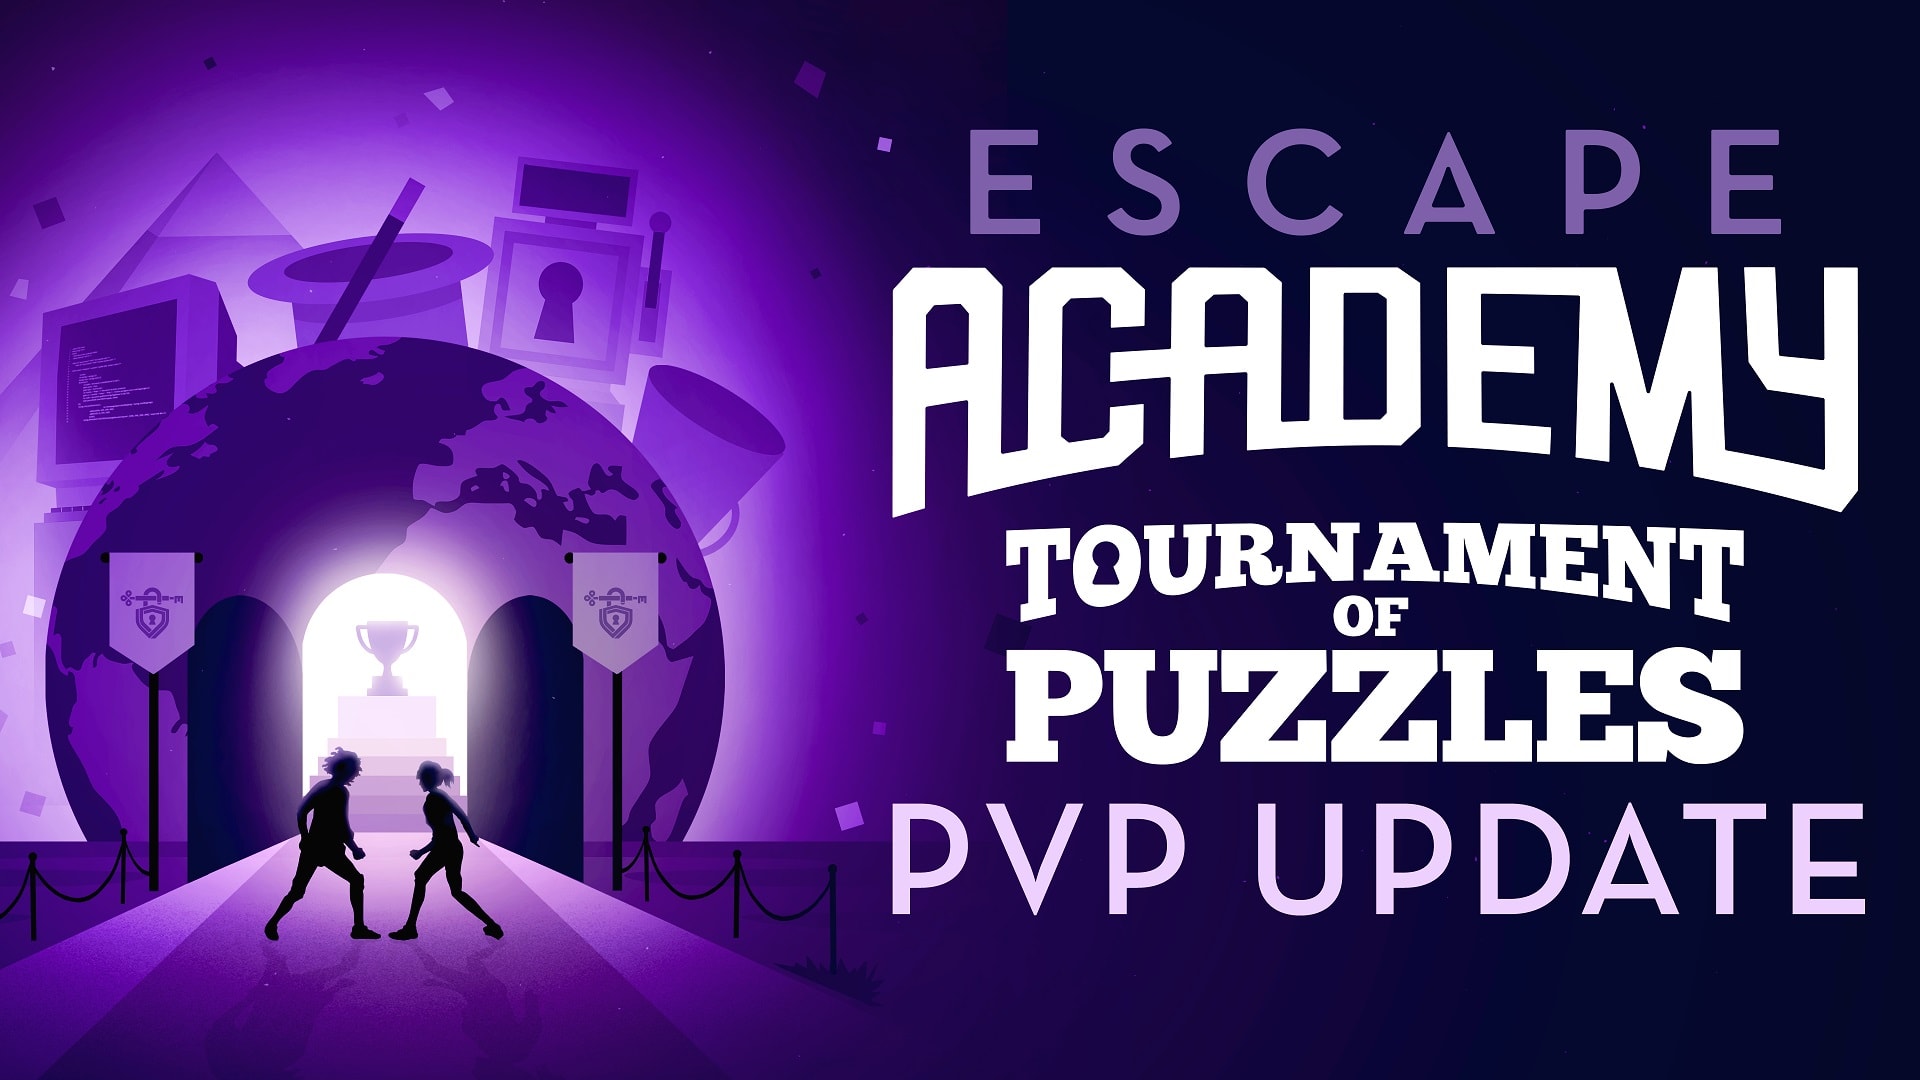 Escape Academy: The Complete Edition